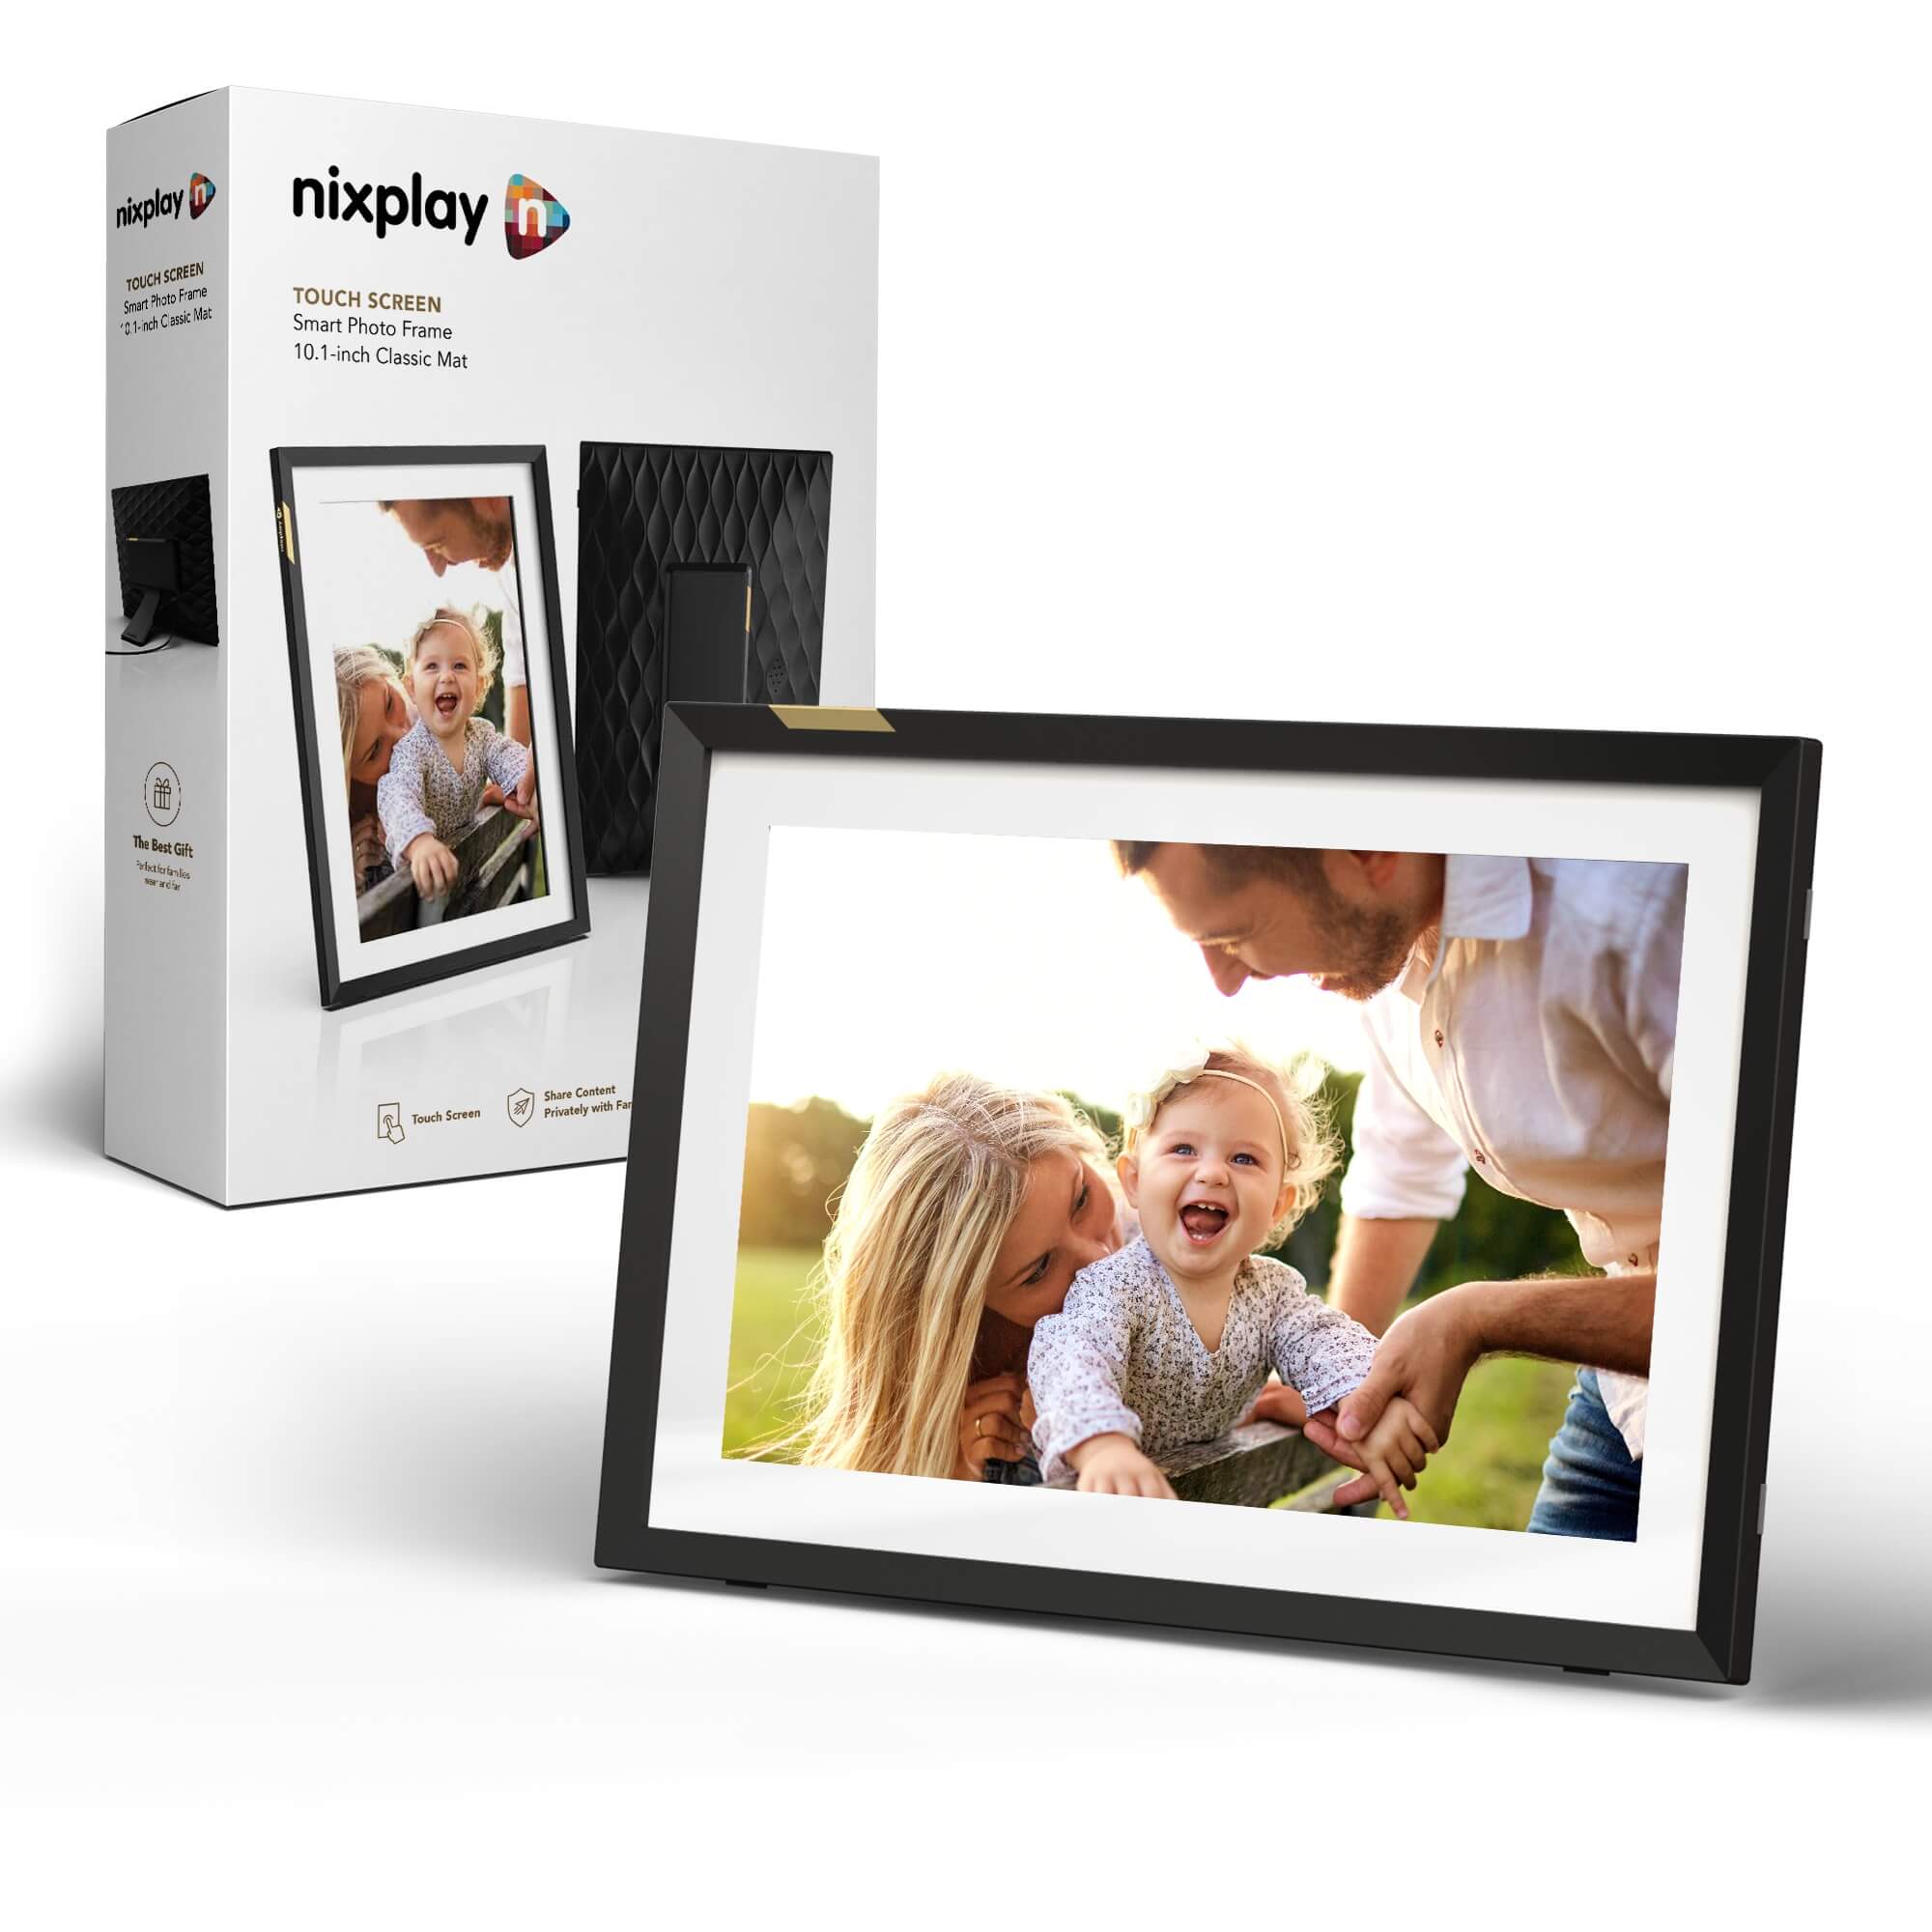 Brookstone PhotoShare Review: One of the Best Digital Photo Frames Available